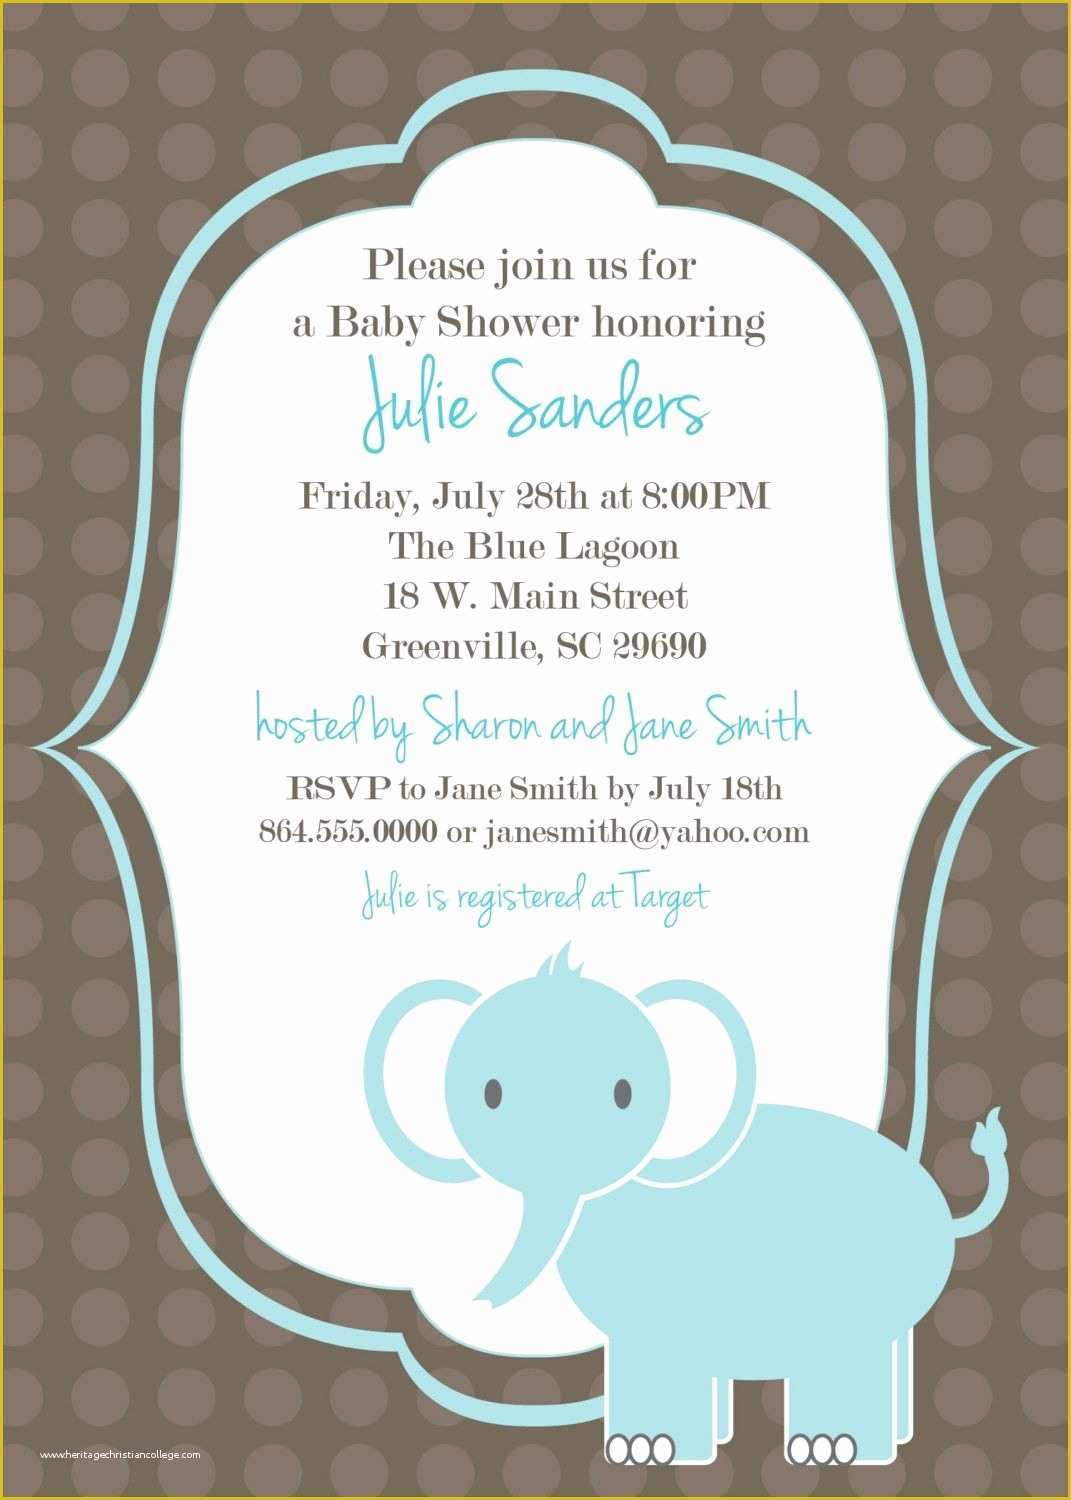 Baby Shower Invitation Card Template Free Download Of Download Free Template Got the Free Baby Shower